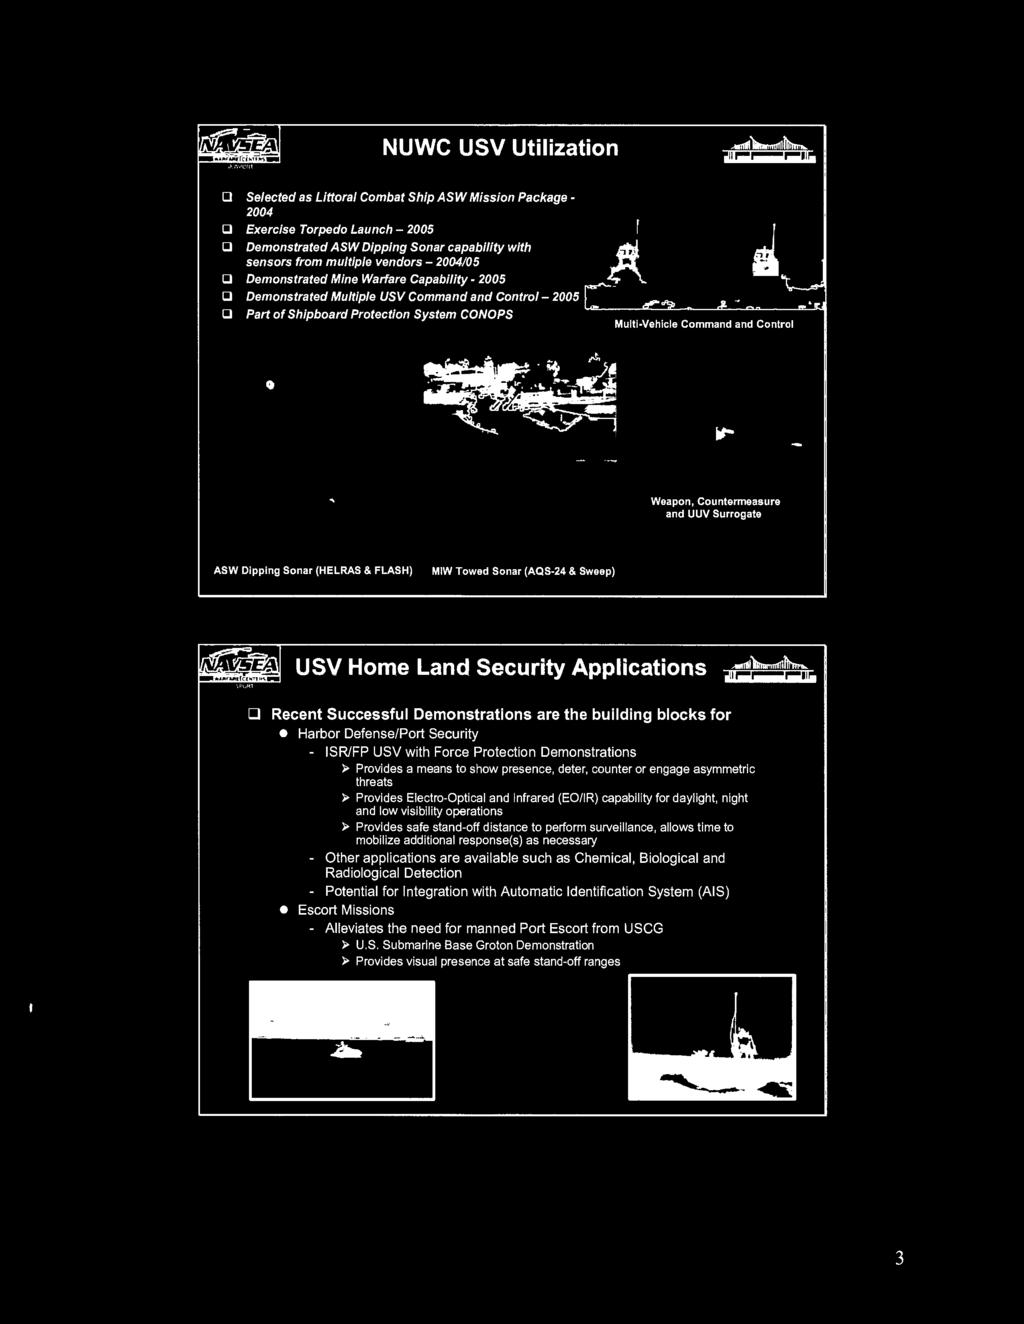 Sonar (HELRAS & FLASH) MIW Towed Sonar (AQS-24 & Sweep) USV Home Land Security Applications D Recent Successful Demonstrations are the building blocks for Harbor Defense/Port Security - ISRIFP USV